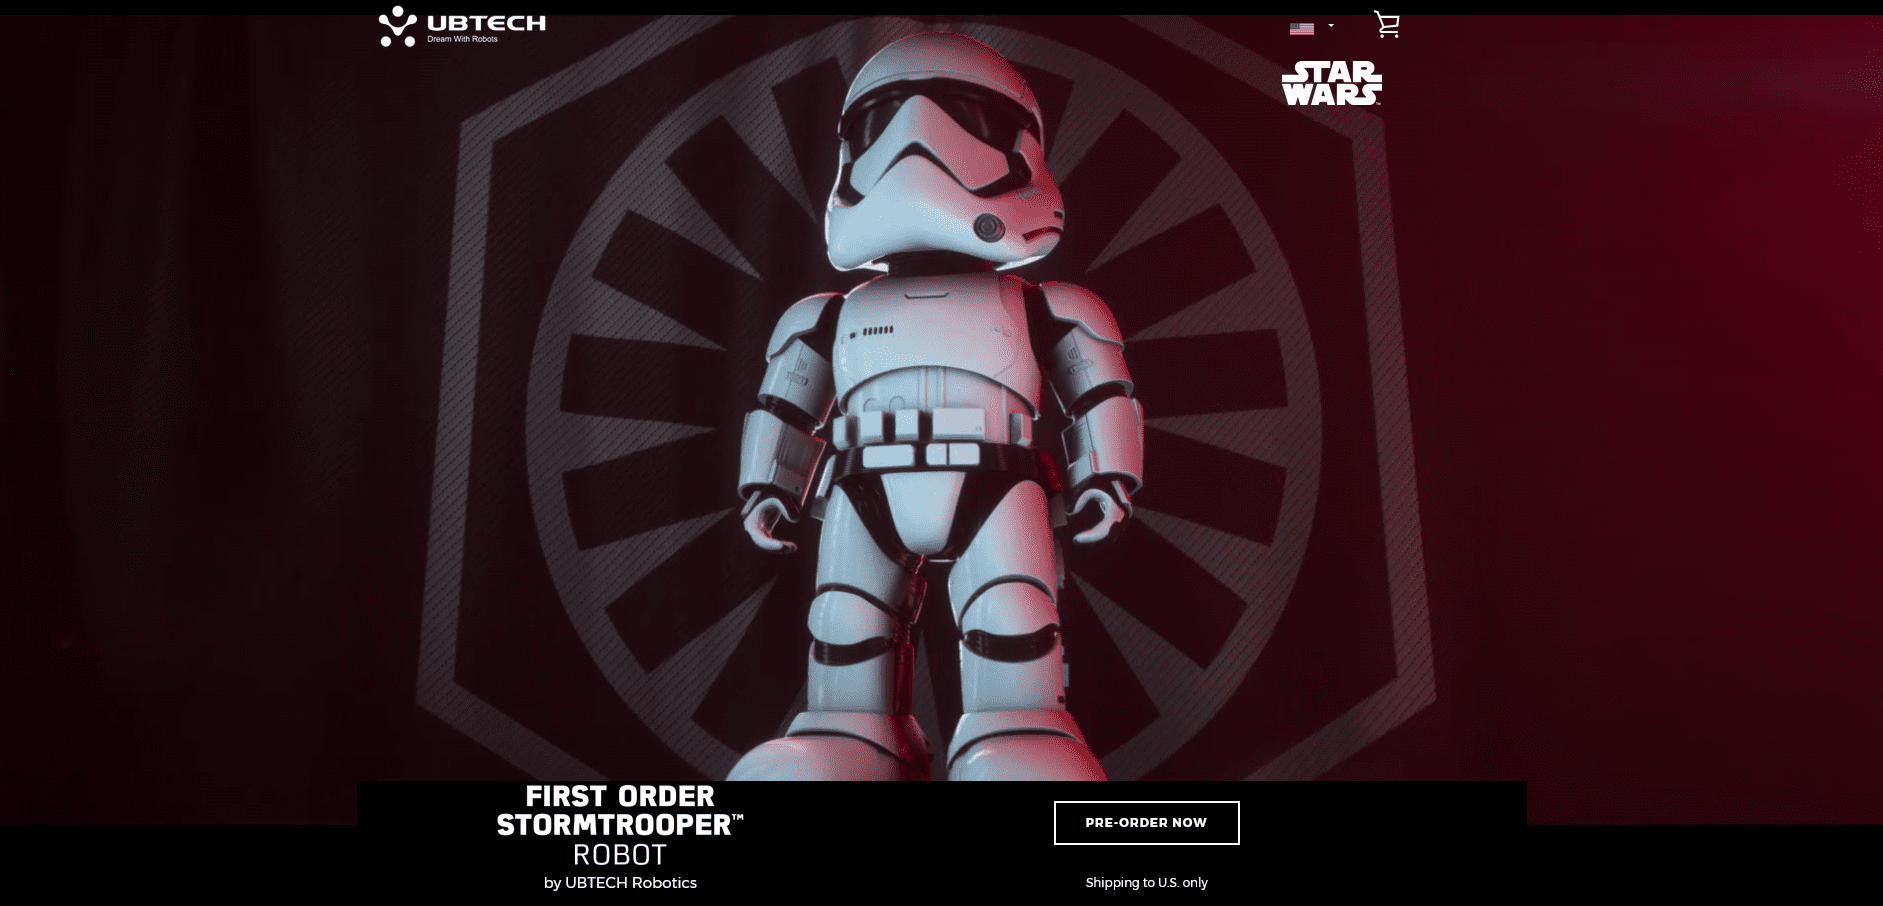 You Can Get Your Very Own Robotic Stormtroopers